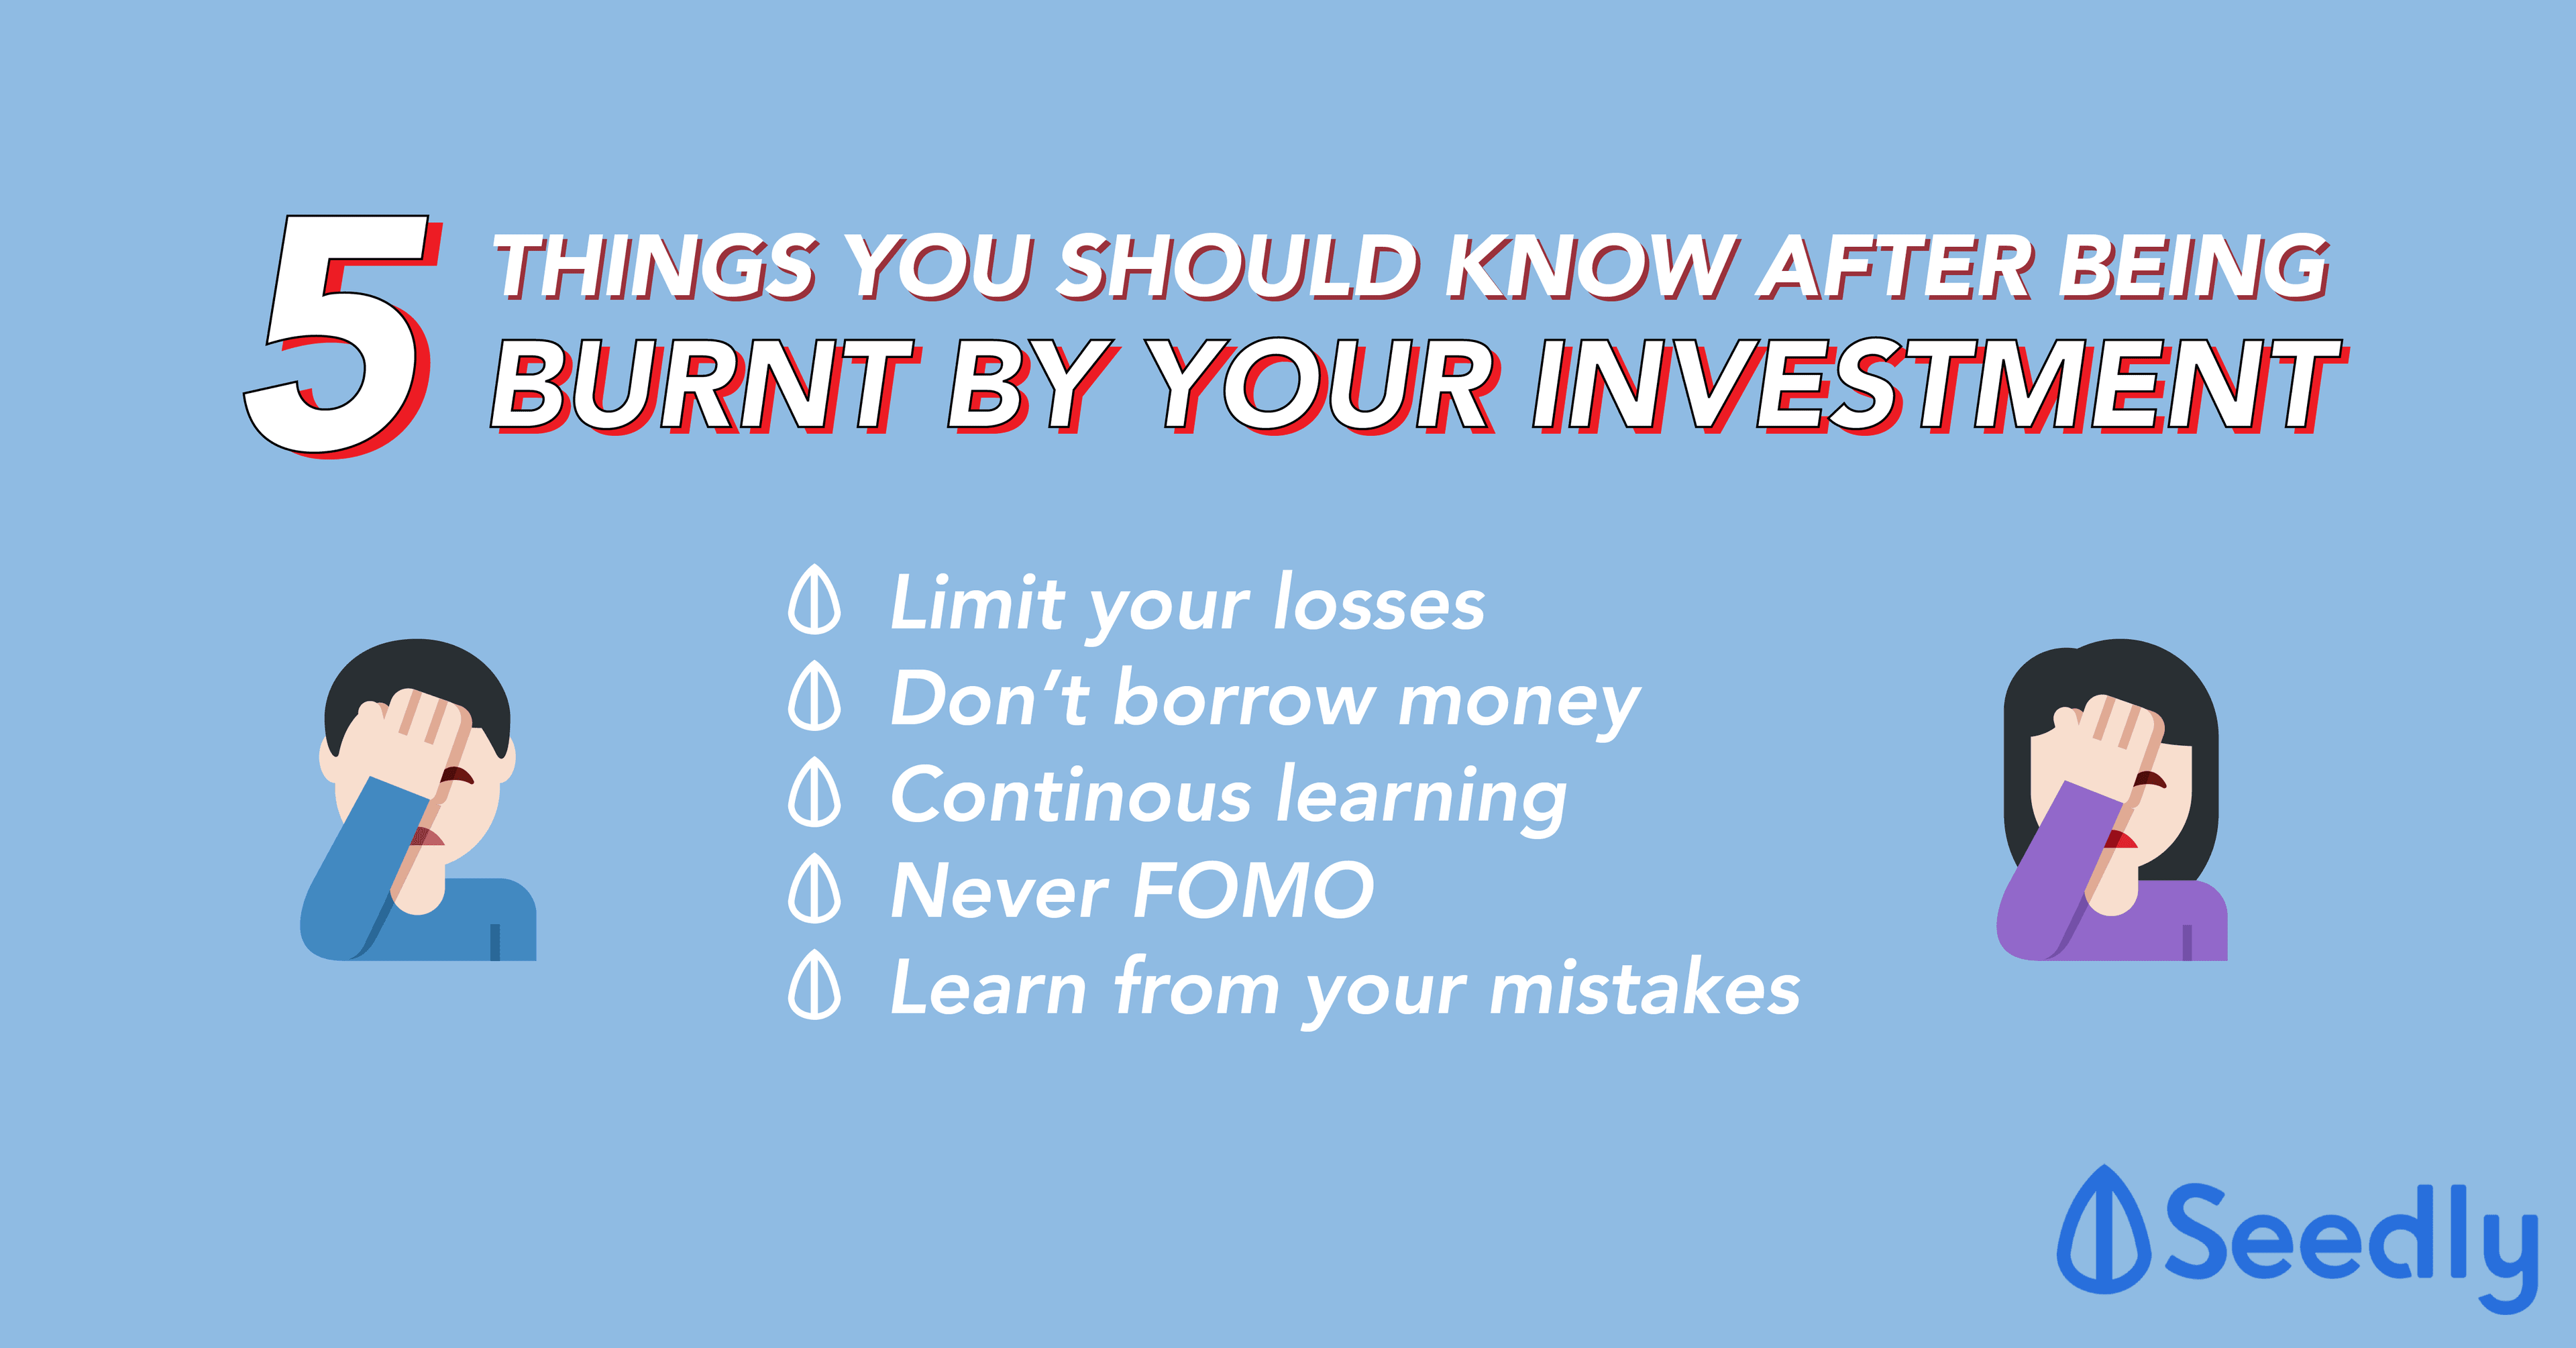 5 Things You Should Know After Being Burnt by Your Investment